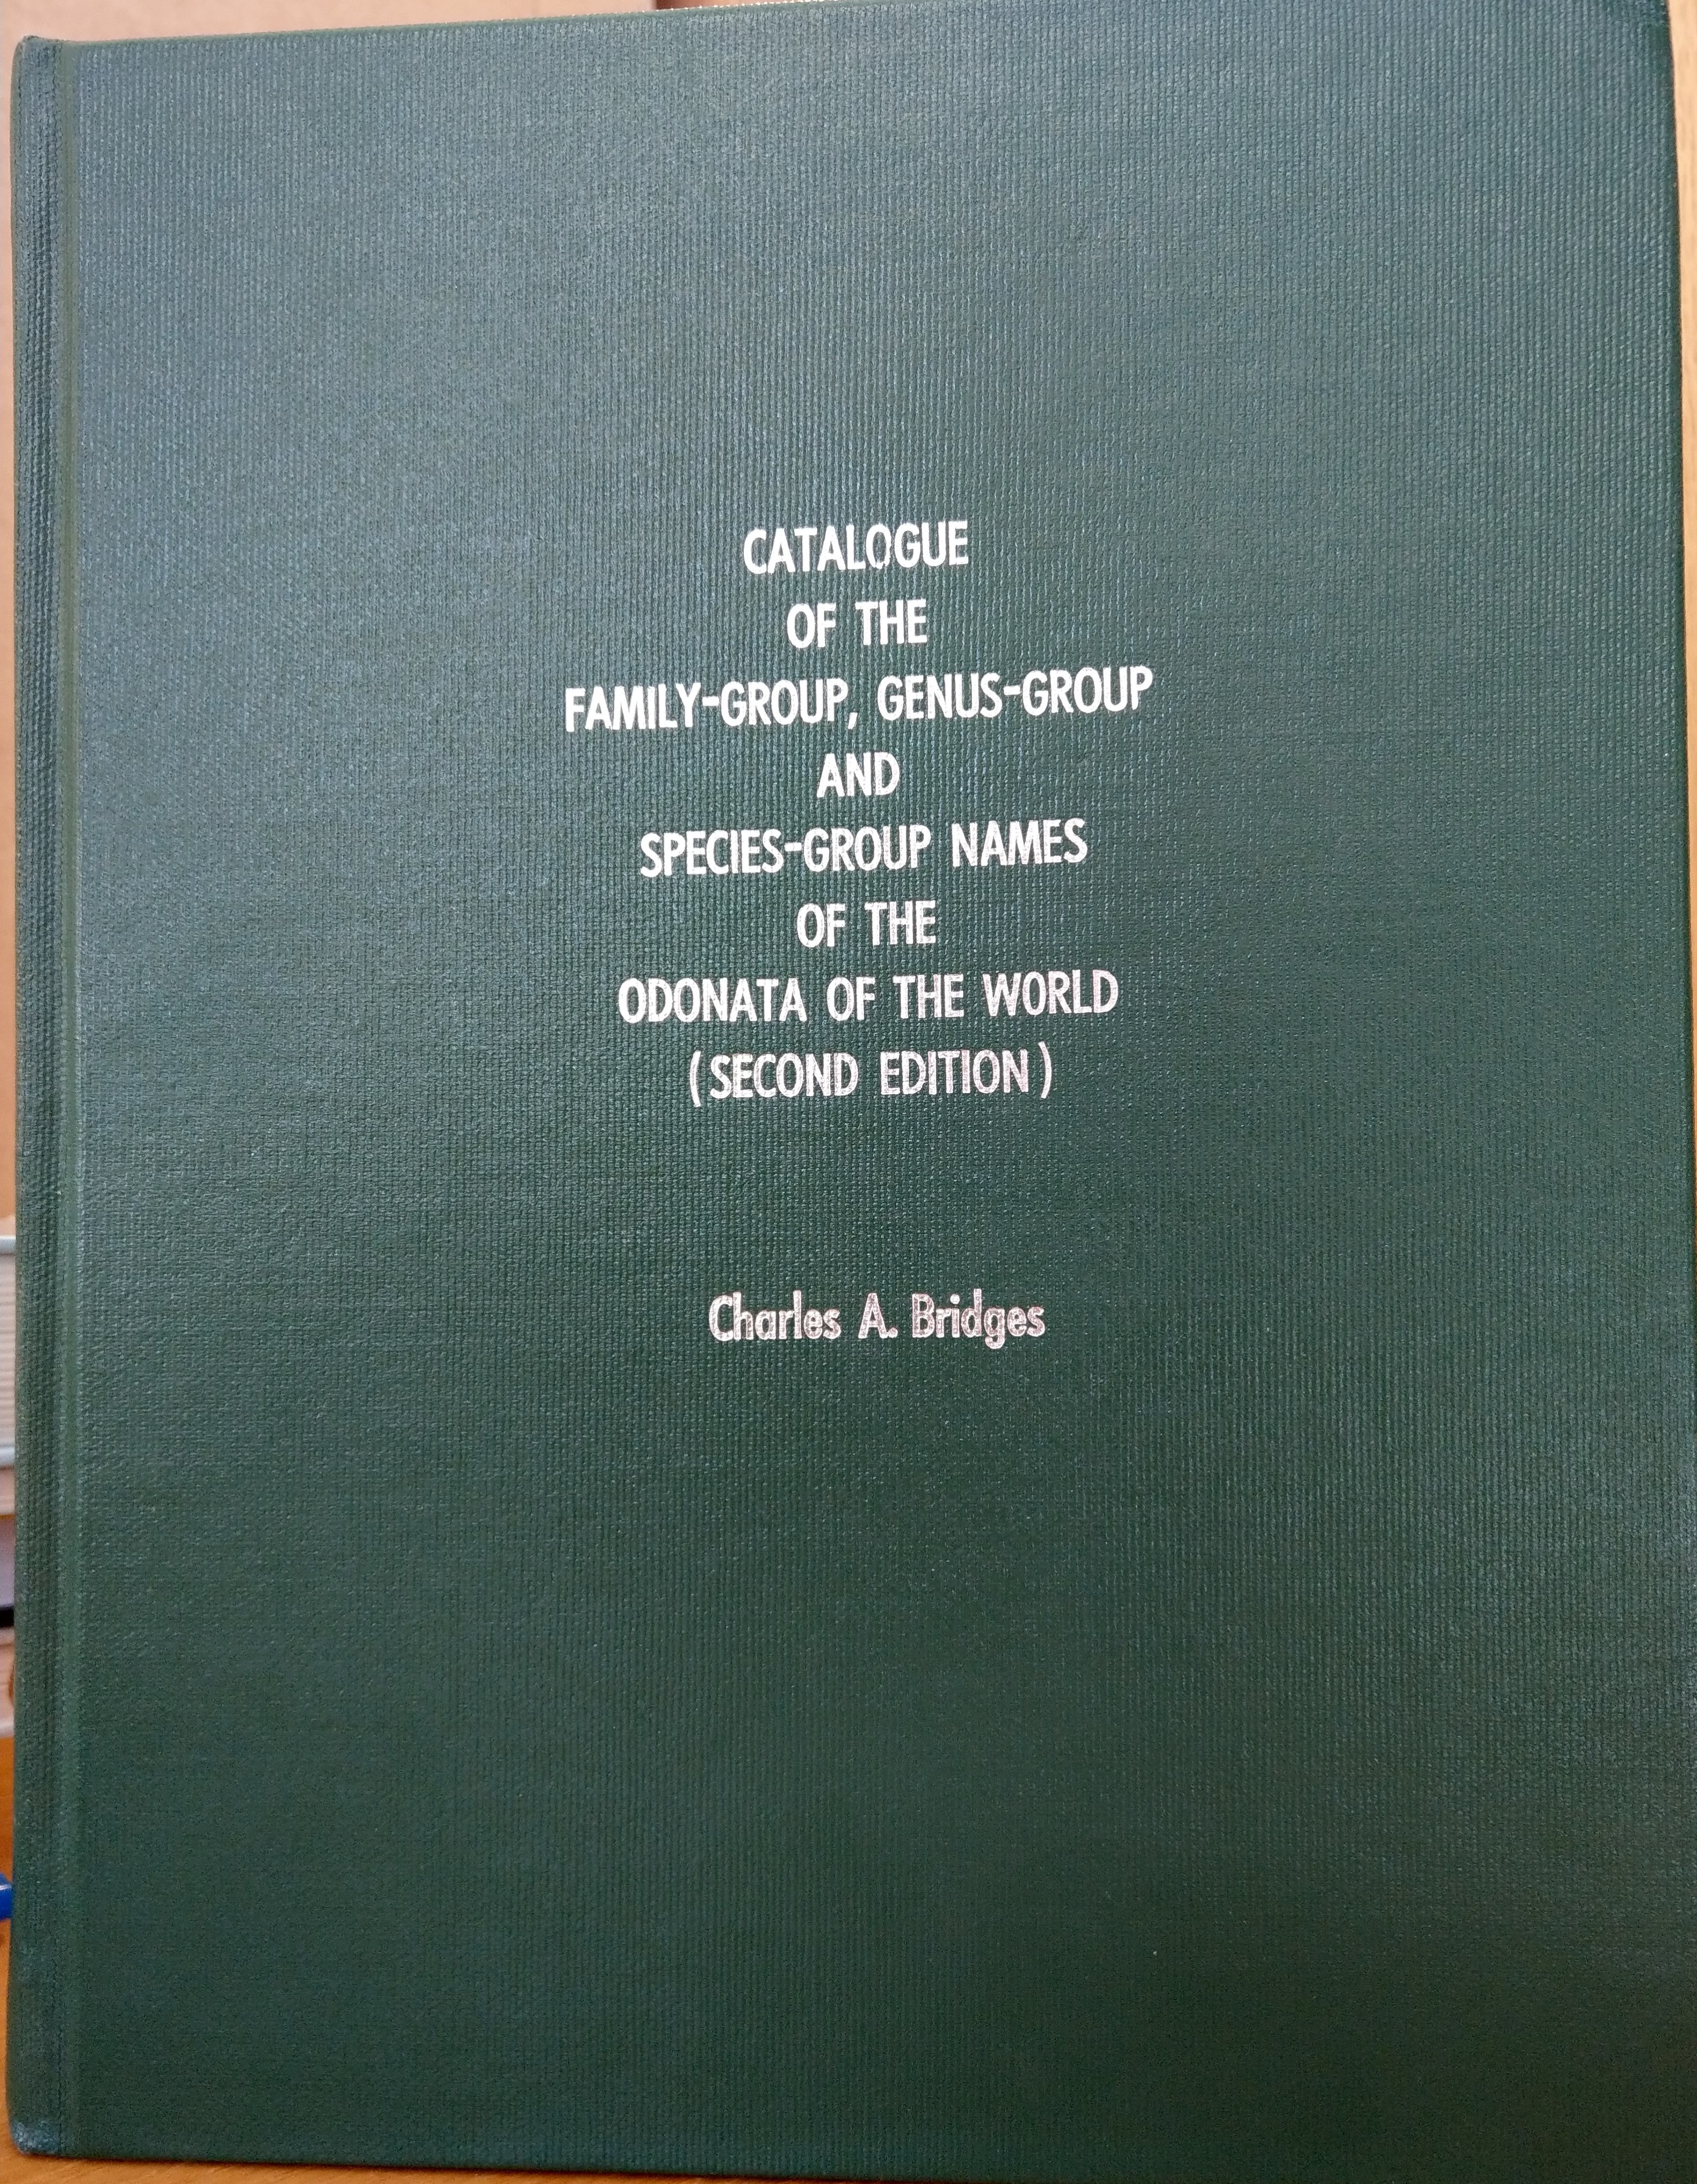 Charles A. Bridges: Catalogue of the Family-Group, Genus-Group and Species-Group Names of the Odonata of the World (Rippl-Rónai Múzeum CC BY-NC-ND)